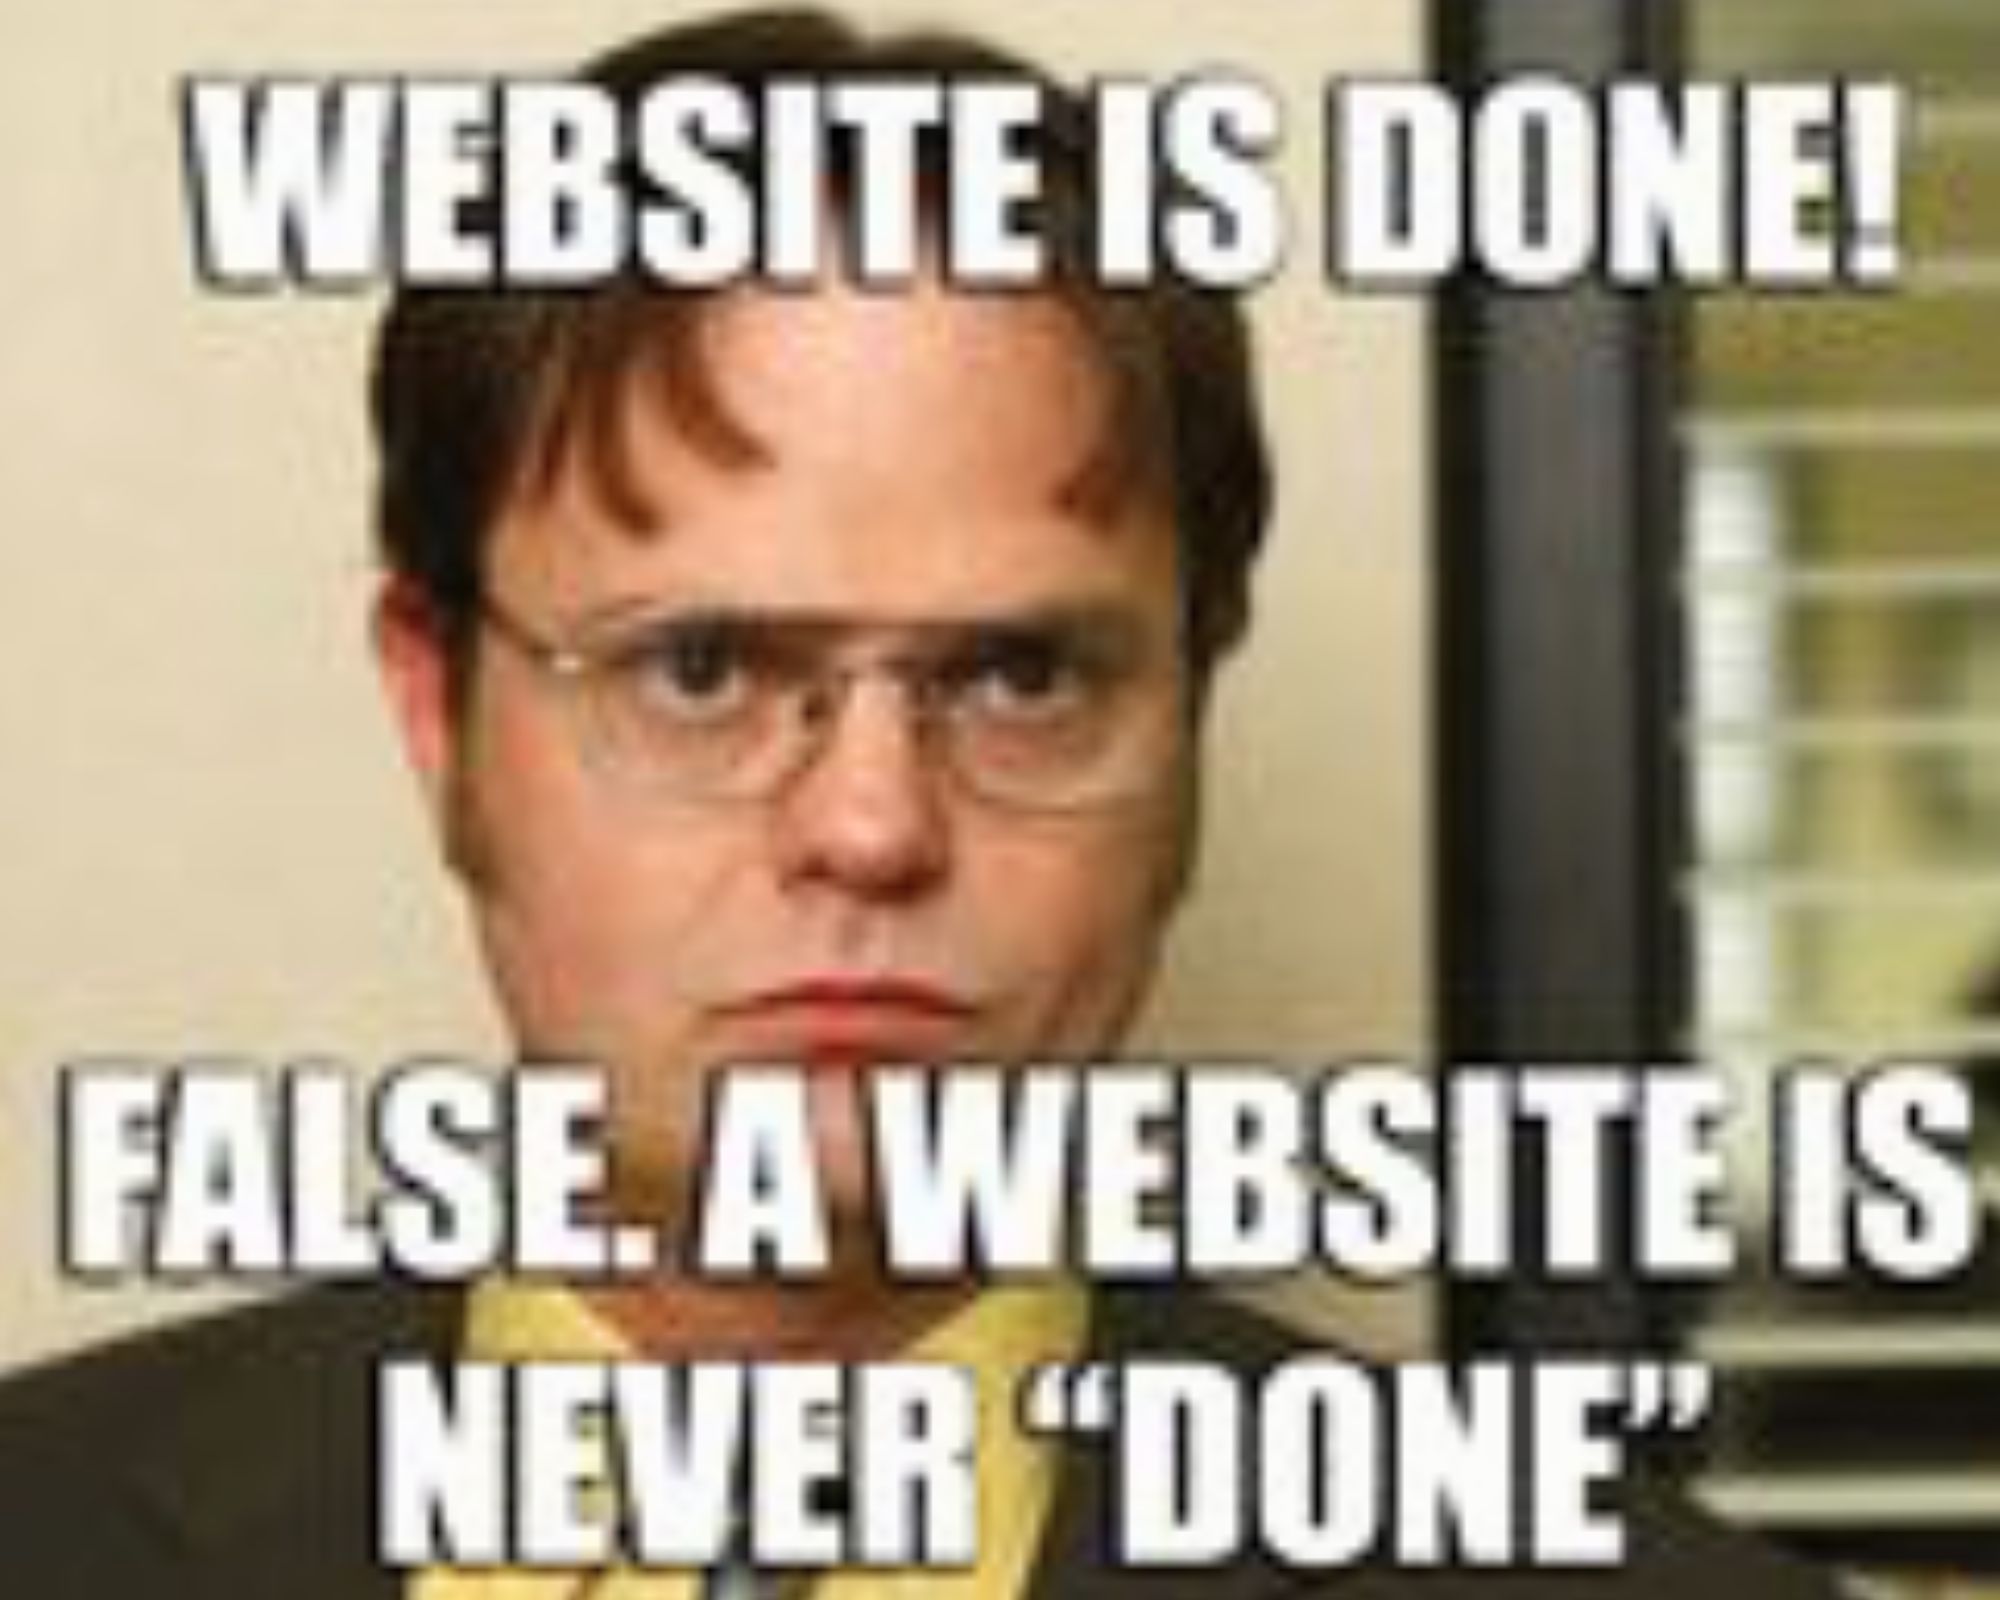 Man staring. Text says "Website is done! False. A website is never 'done'"